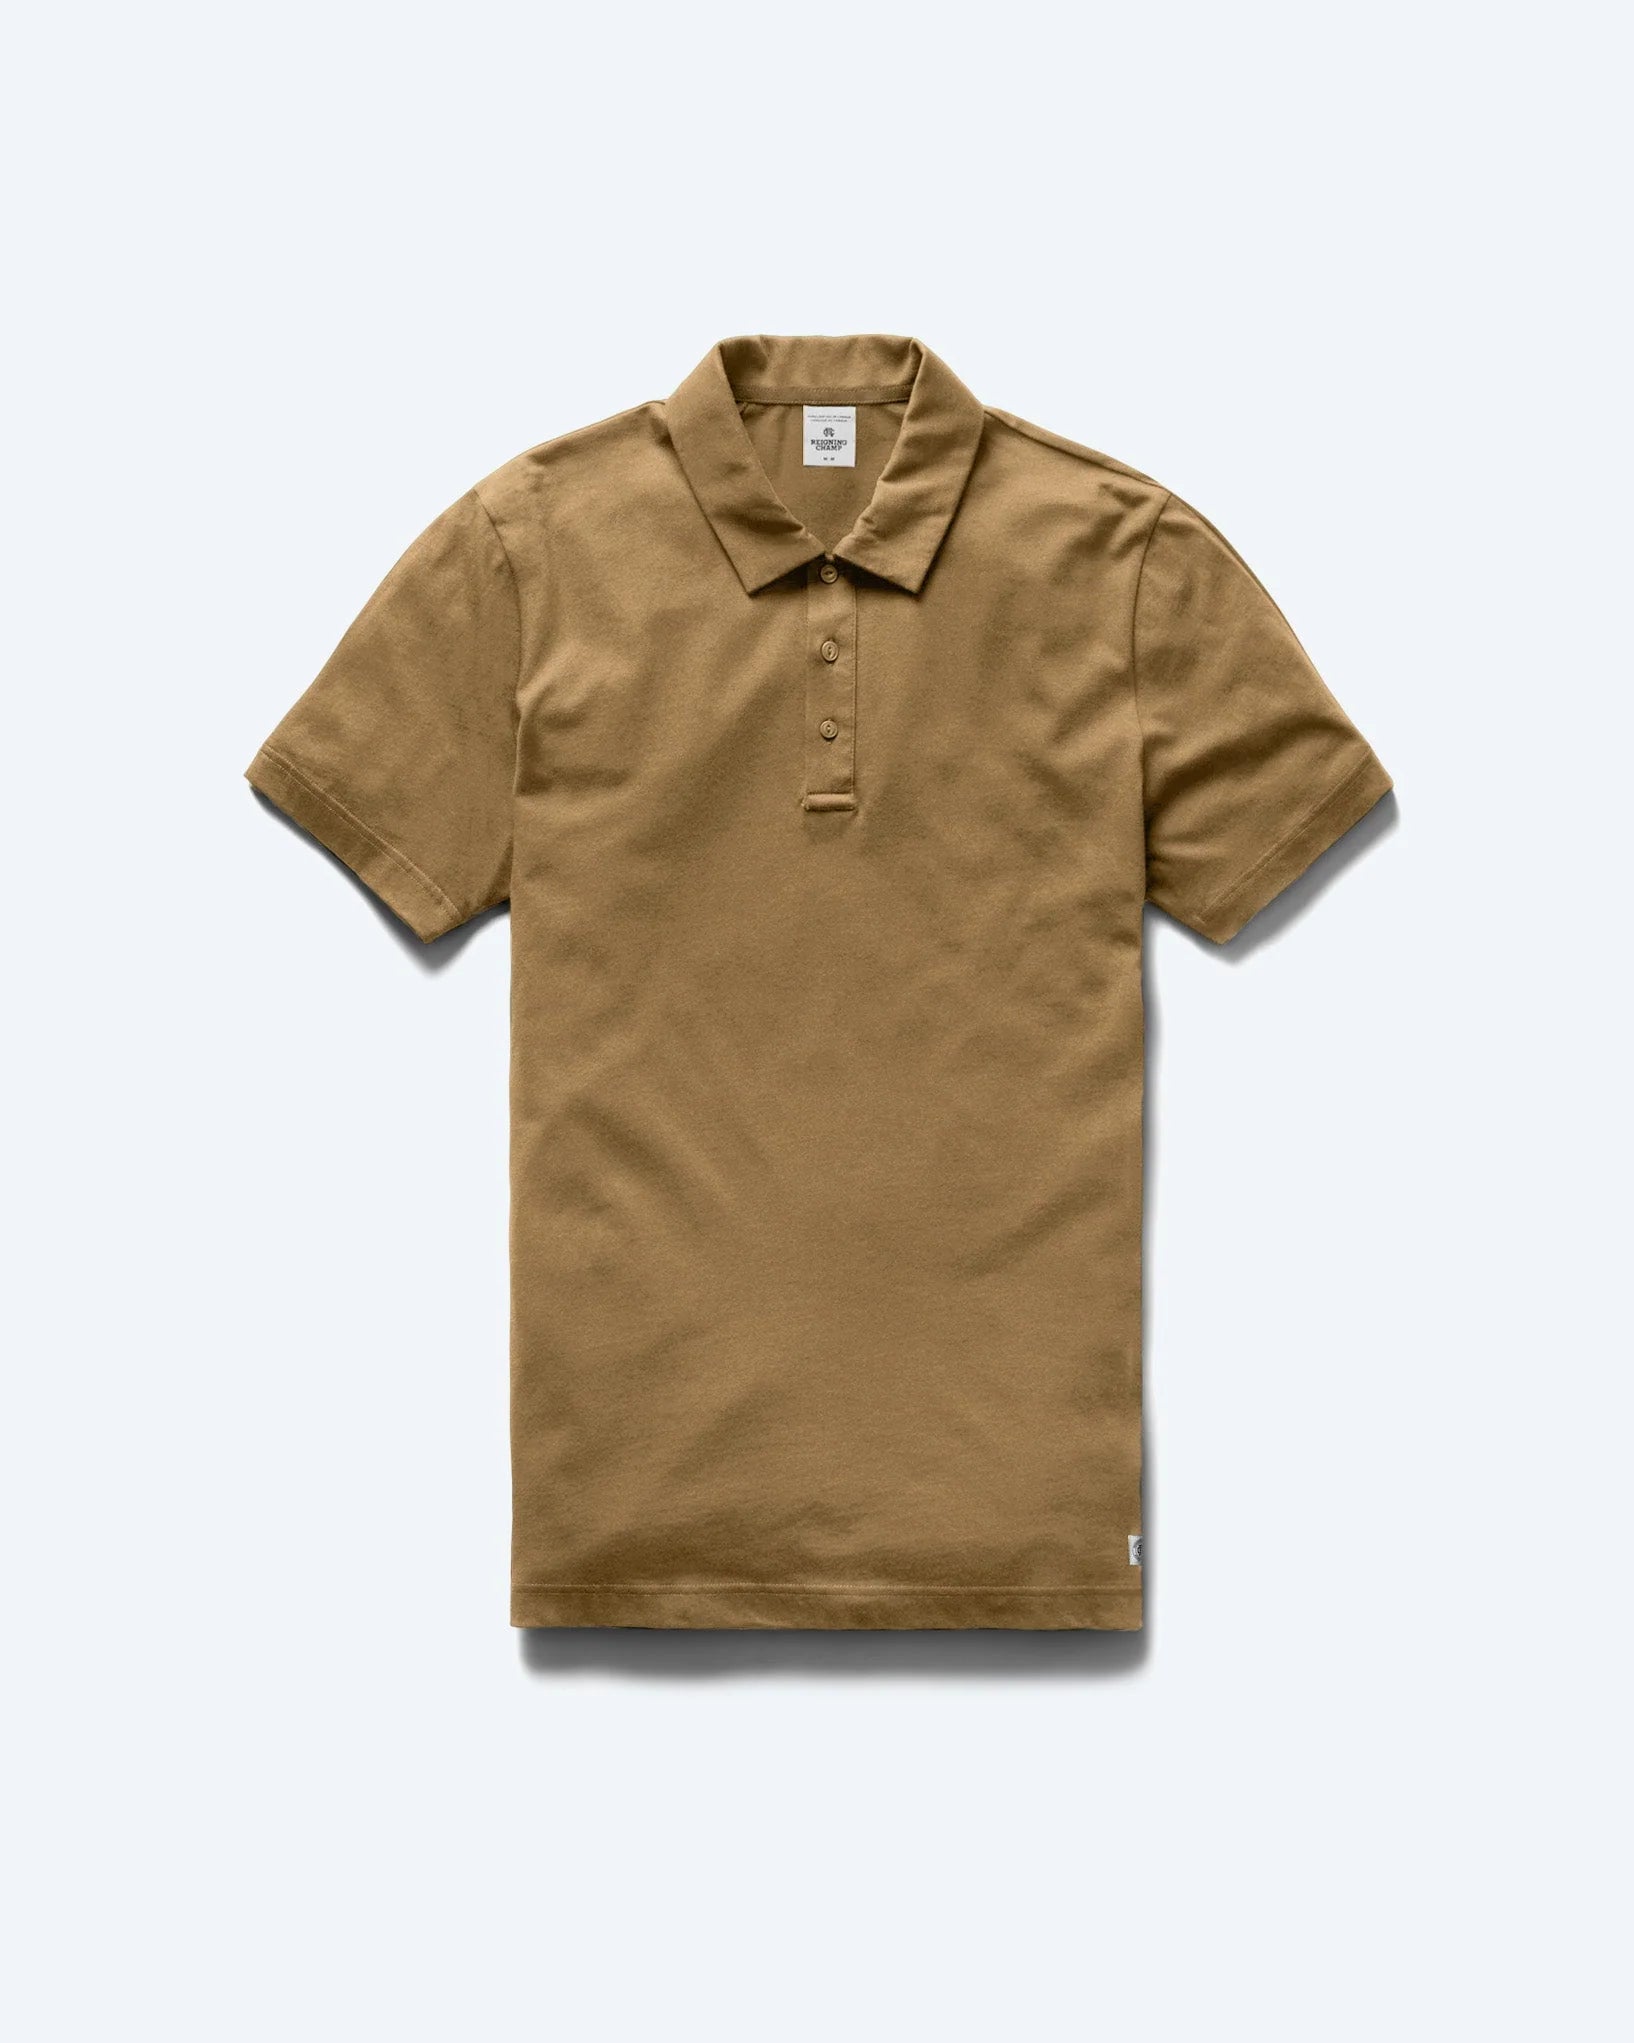 Reigning Champ Lightweight Jersey Polo in Clay